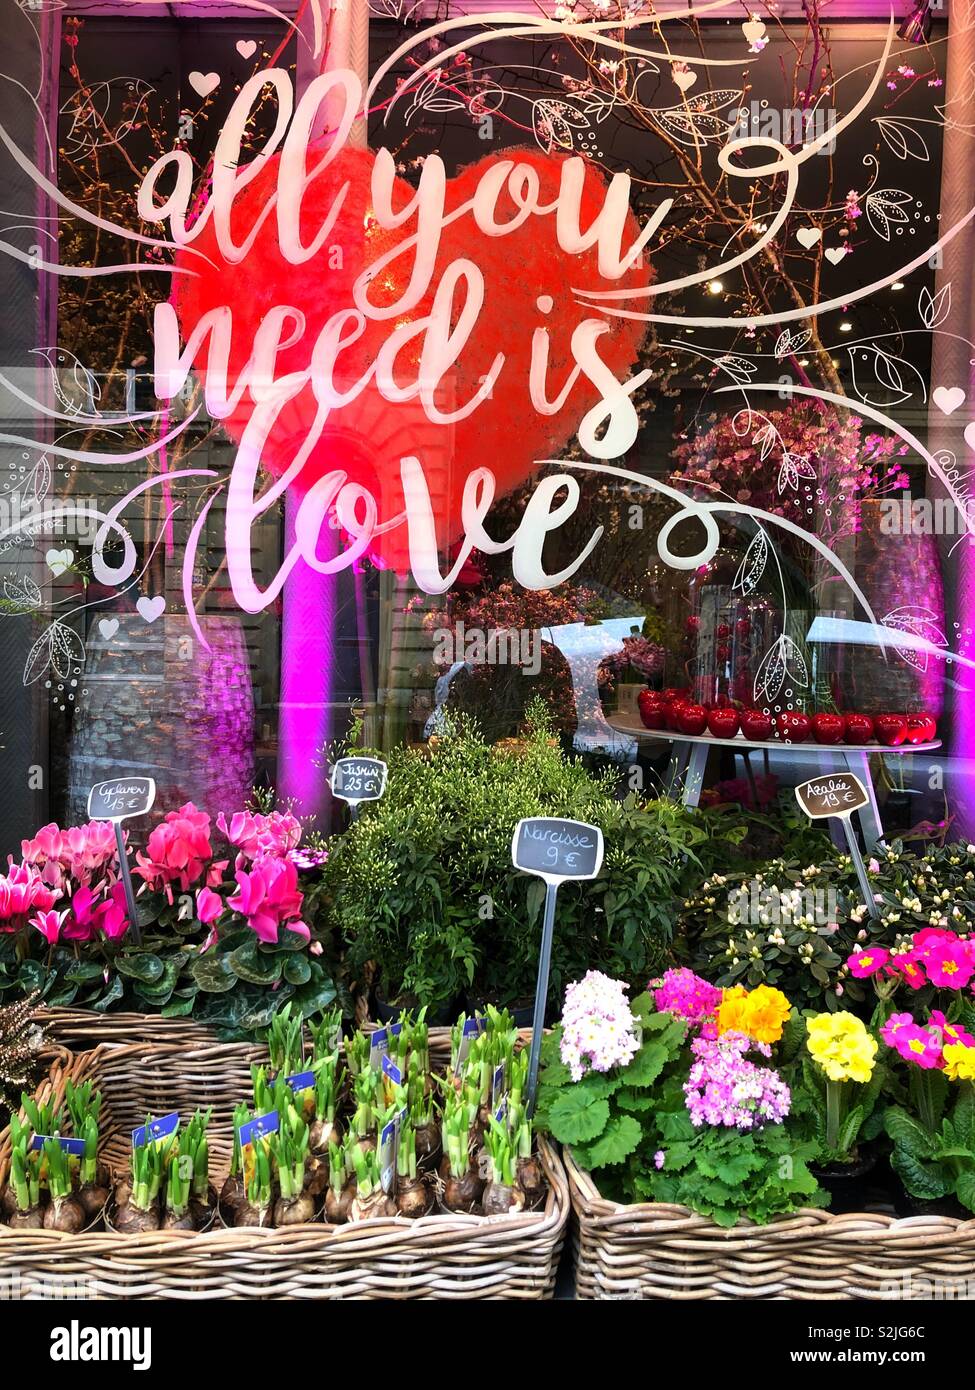 Flowers and plants for sale outside of a flower shop in Paris, France.  The window is painted with the saying “All you need is Love” Stock Photo